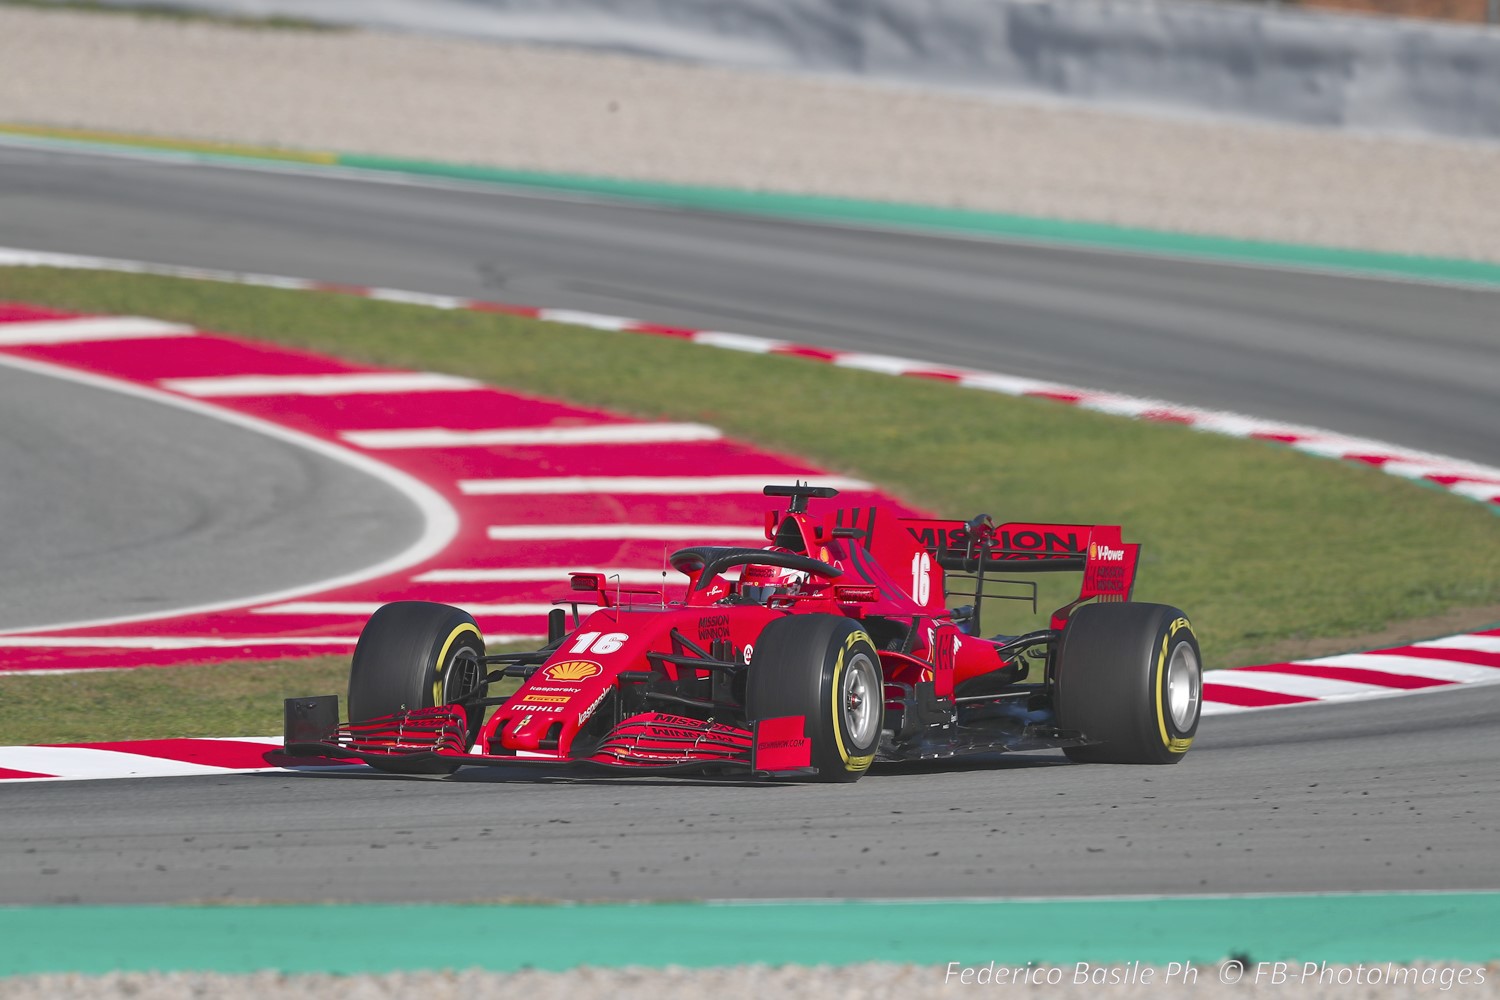 Ferrari and Pirelli have now called off the 18-wheel and tire test at Fiorano due to the virus